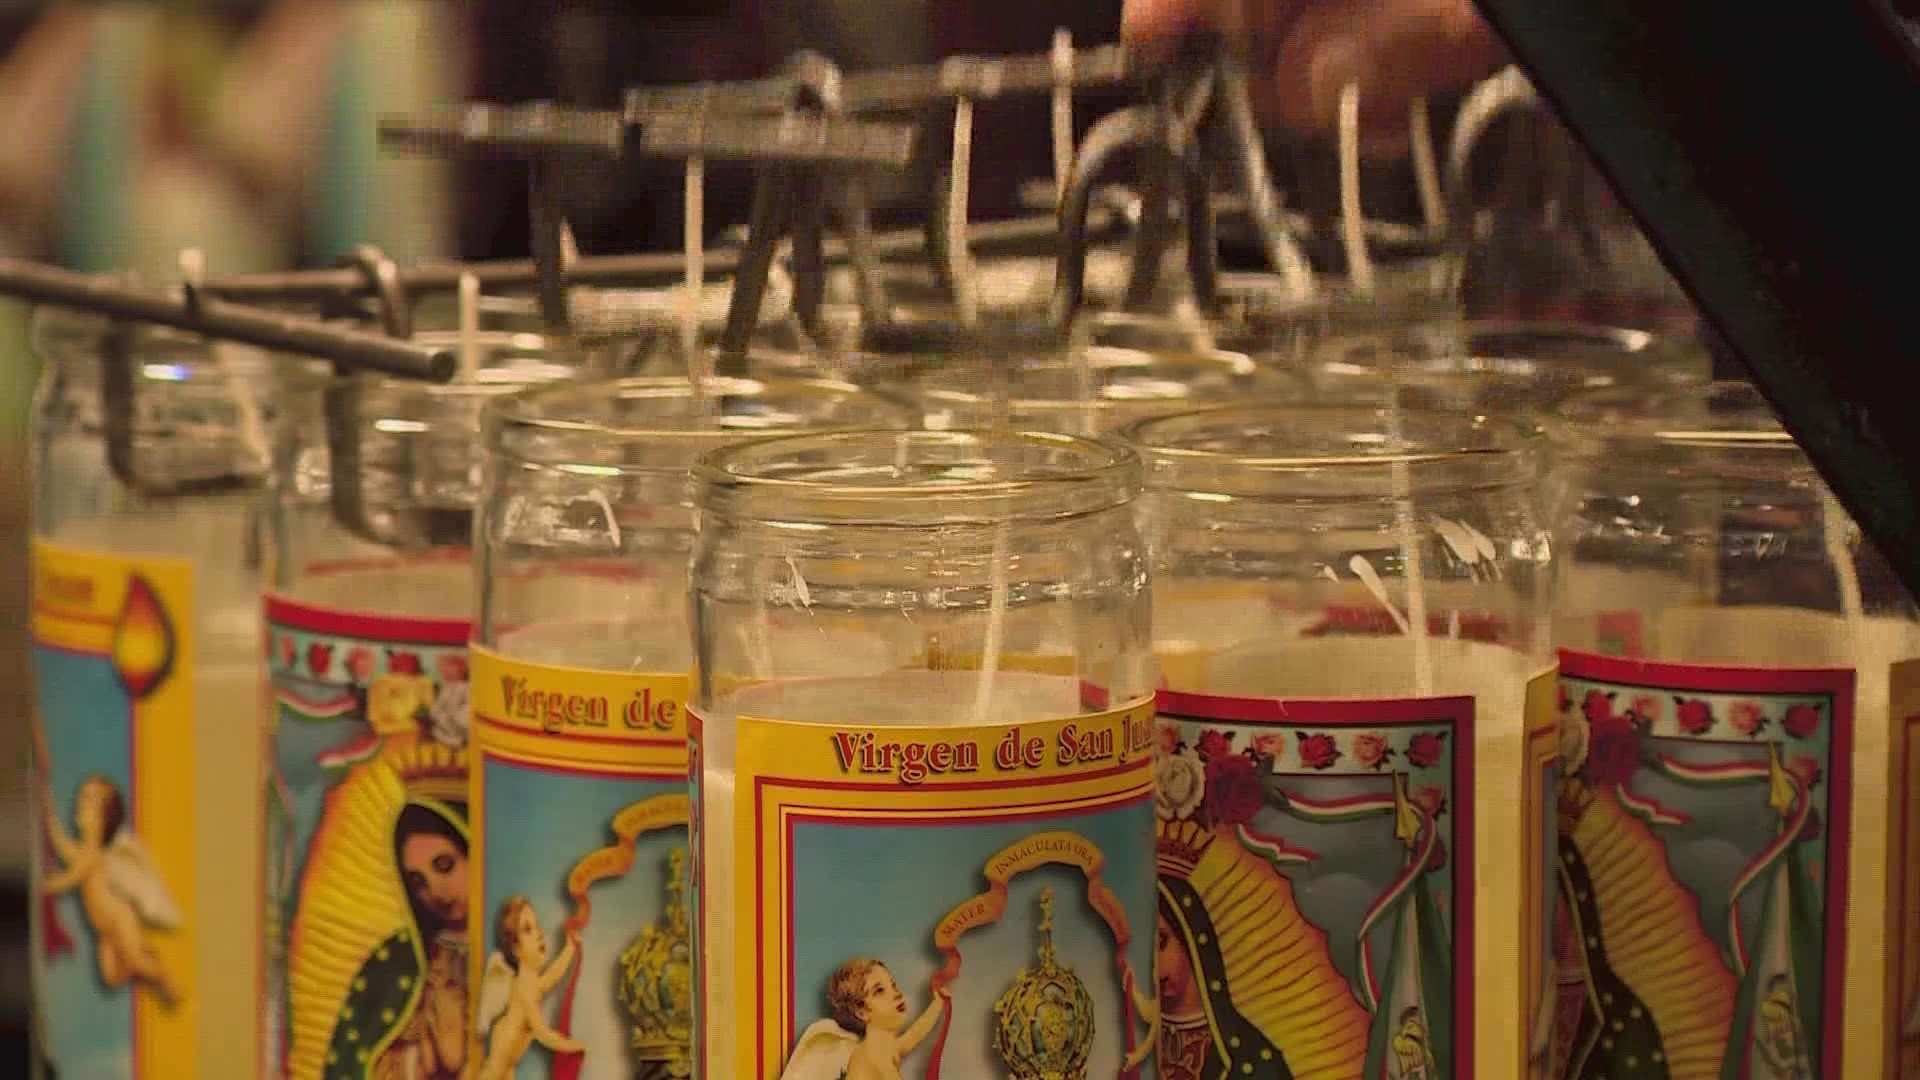 Company with deep roots in San Antonio continues to evolve their prayer candles.